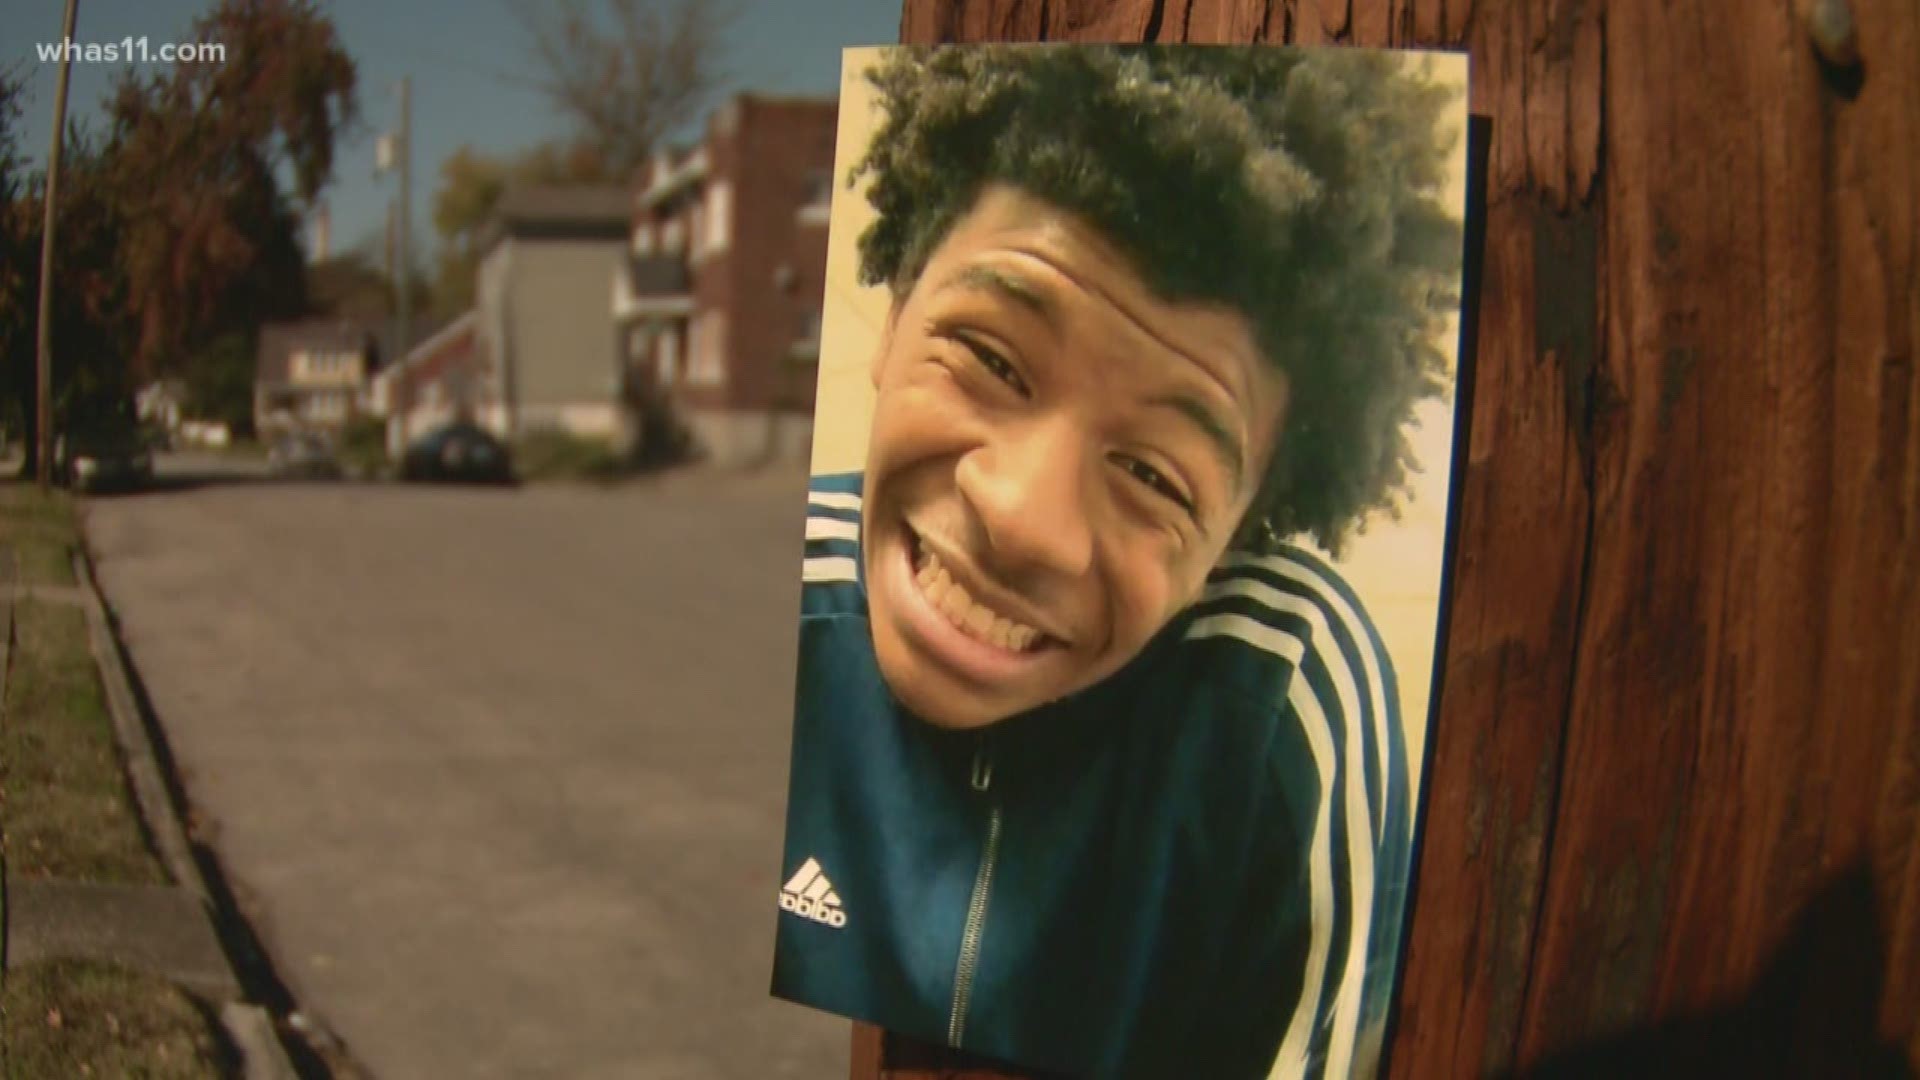 17-year-old Decorian Curry was murdered in a drive-by shooting in May.